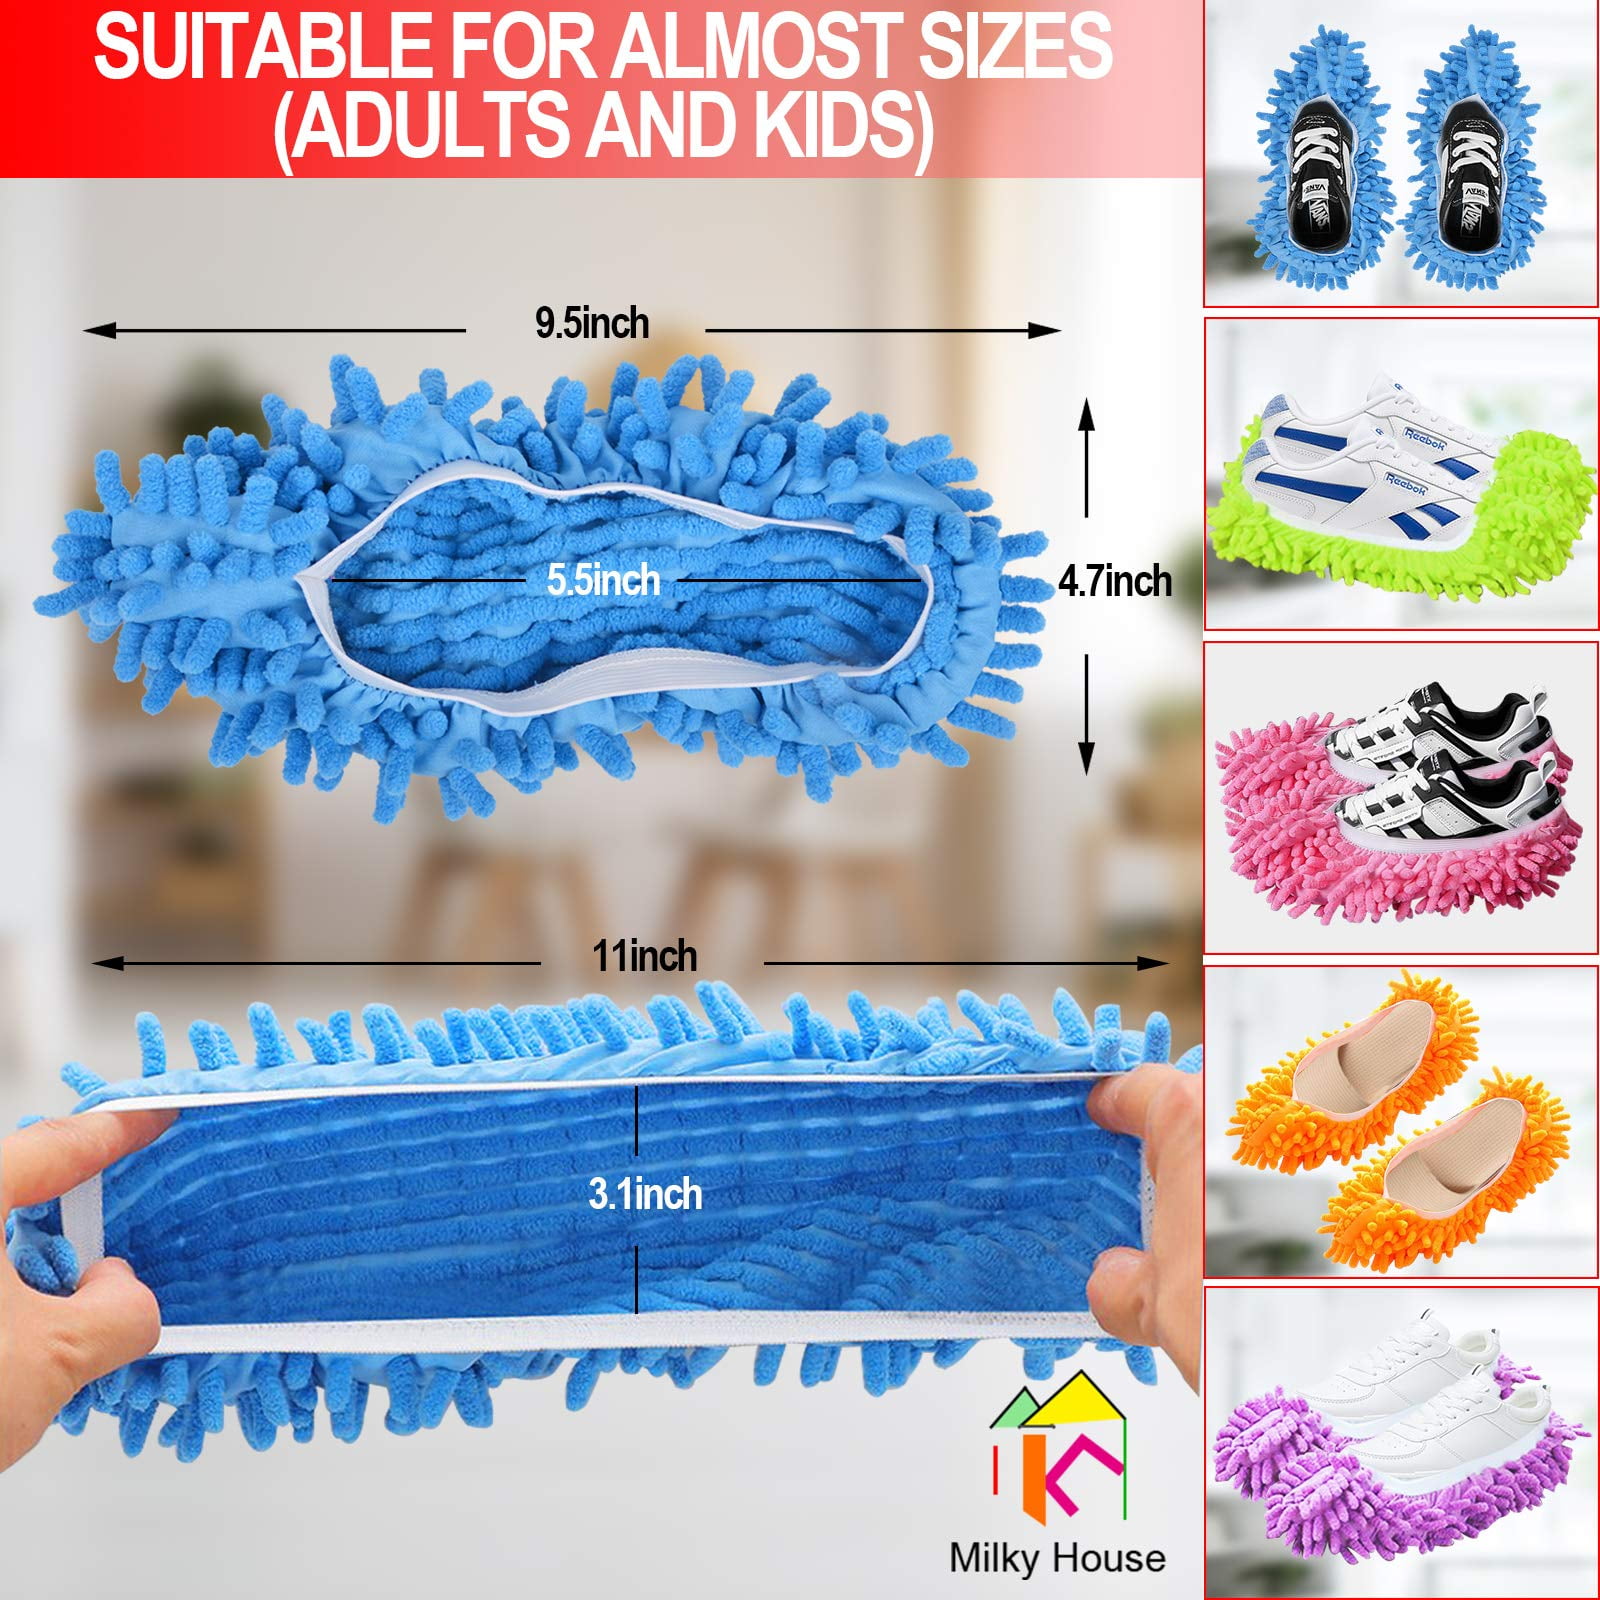 Mop Slippers Shoes Cover Dust Duster Slippers Cleaning Floor House Was –  TrendVibes